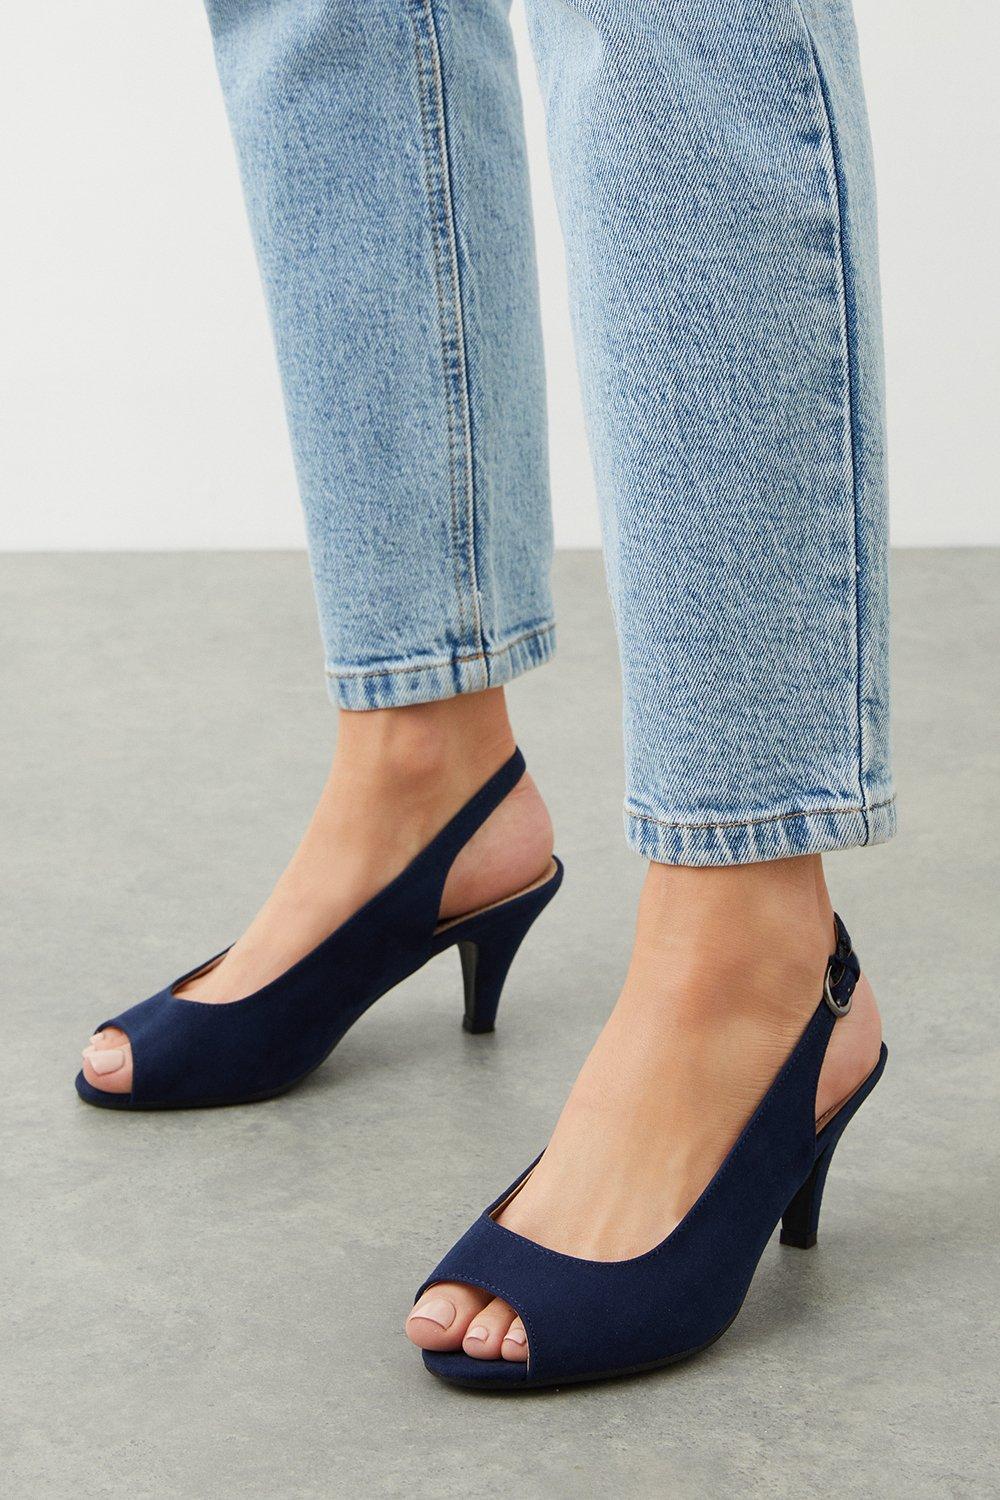 Women’s Good For The Sole: Evelyn Wide Fit Peep Toe Sling Back - navy - 7